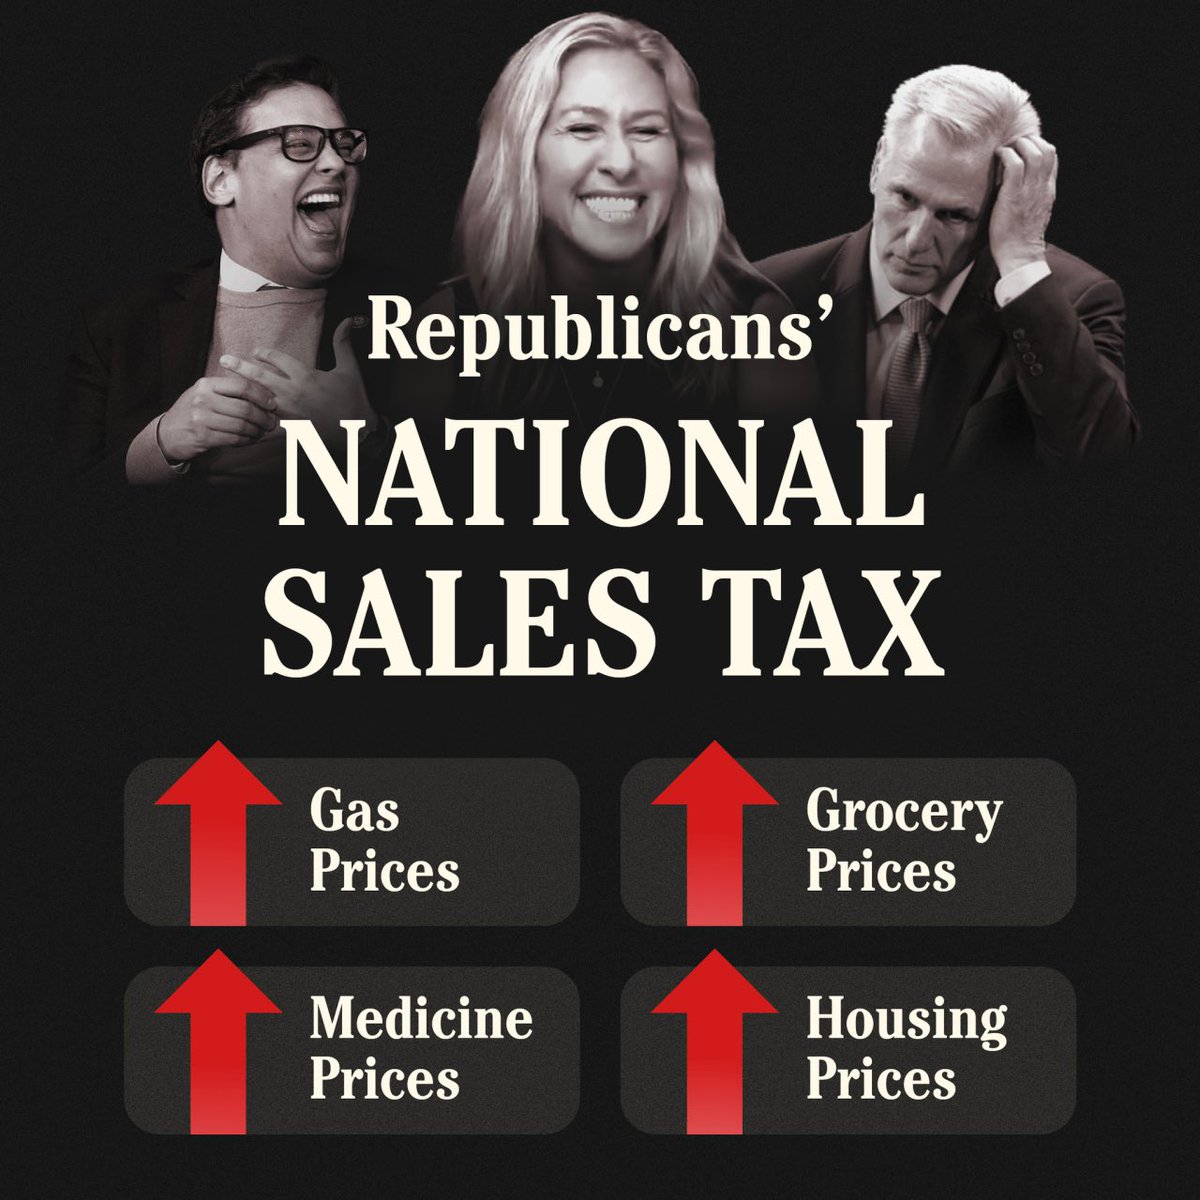 Republicans' national sales tax would be a disaster for working families. #RepublicansAreTooExtreme #democratsdoitbetter #wtpBLUE